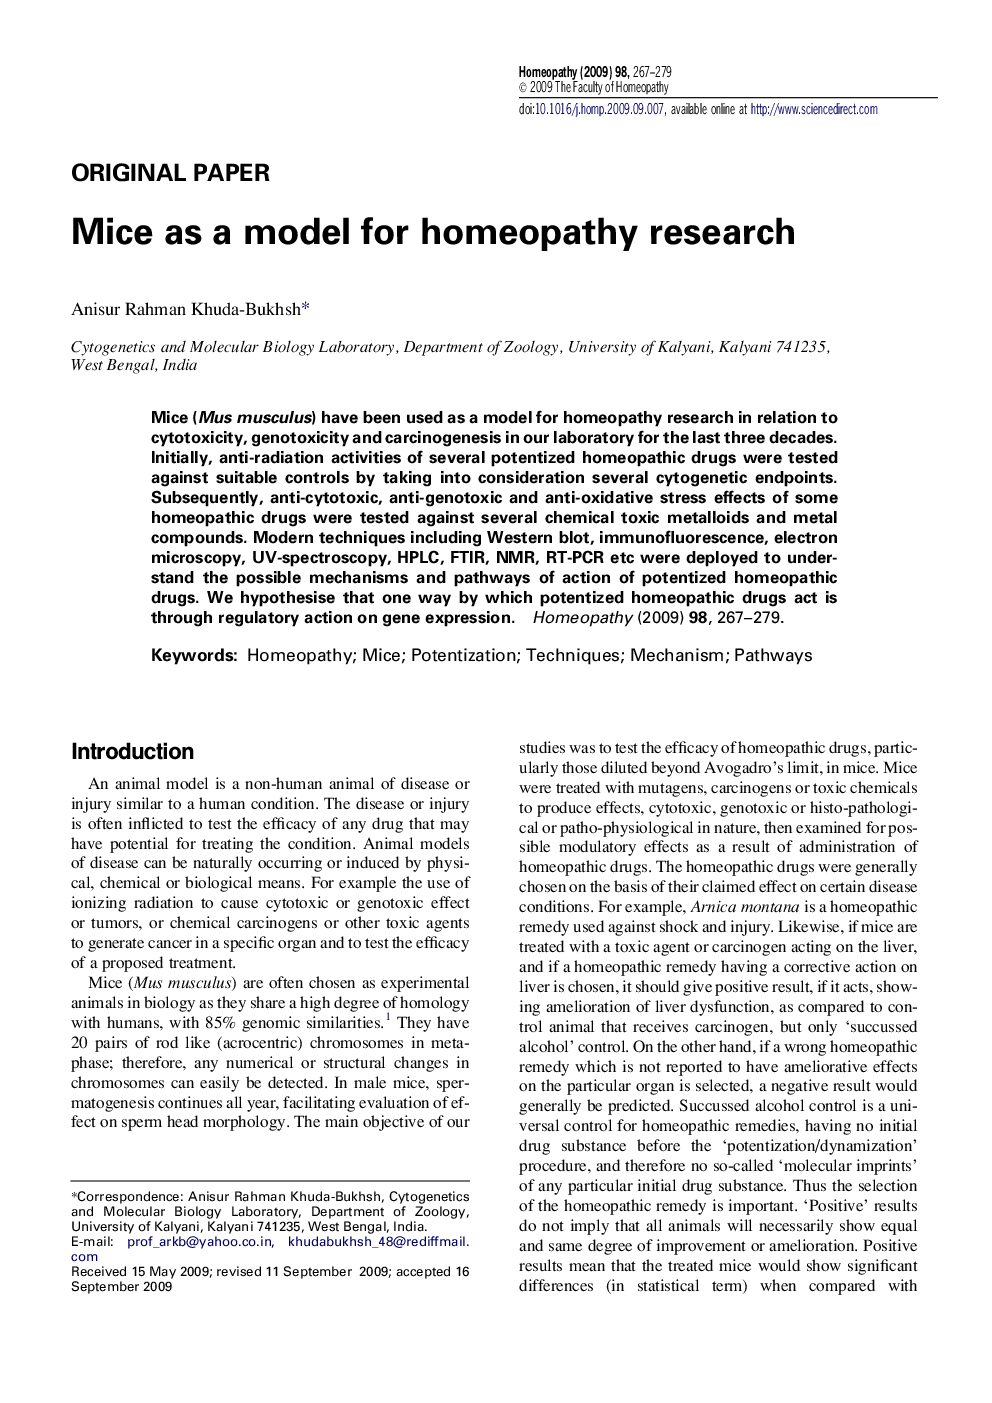 Mice as a model for homeopathy research